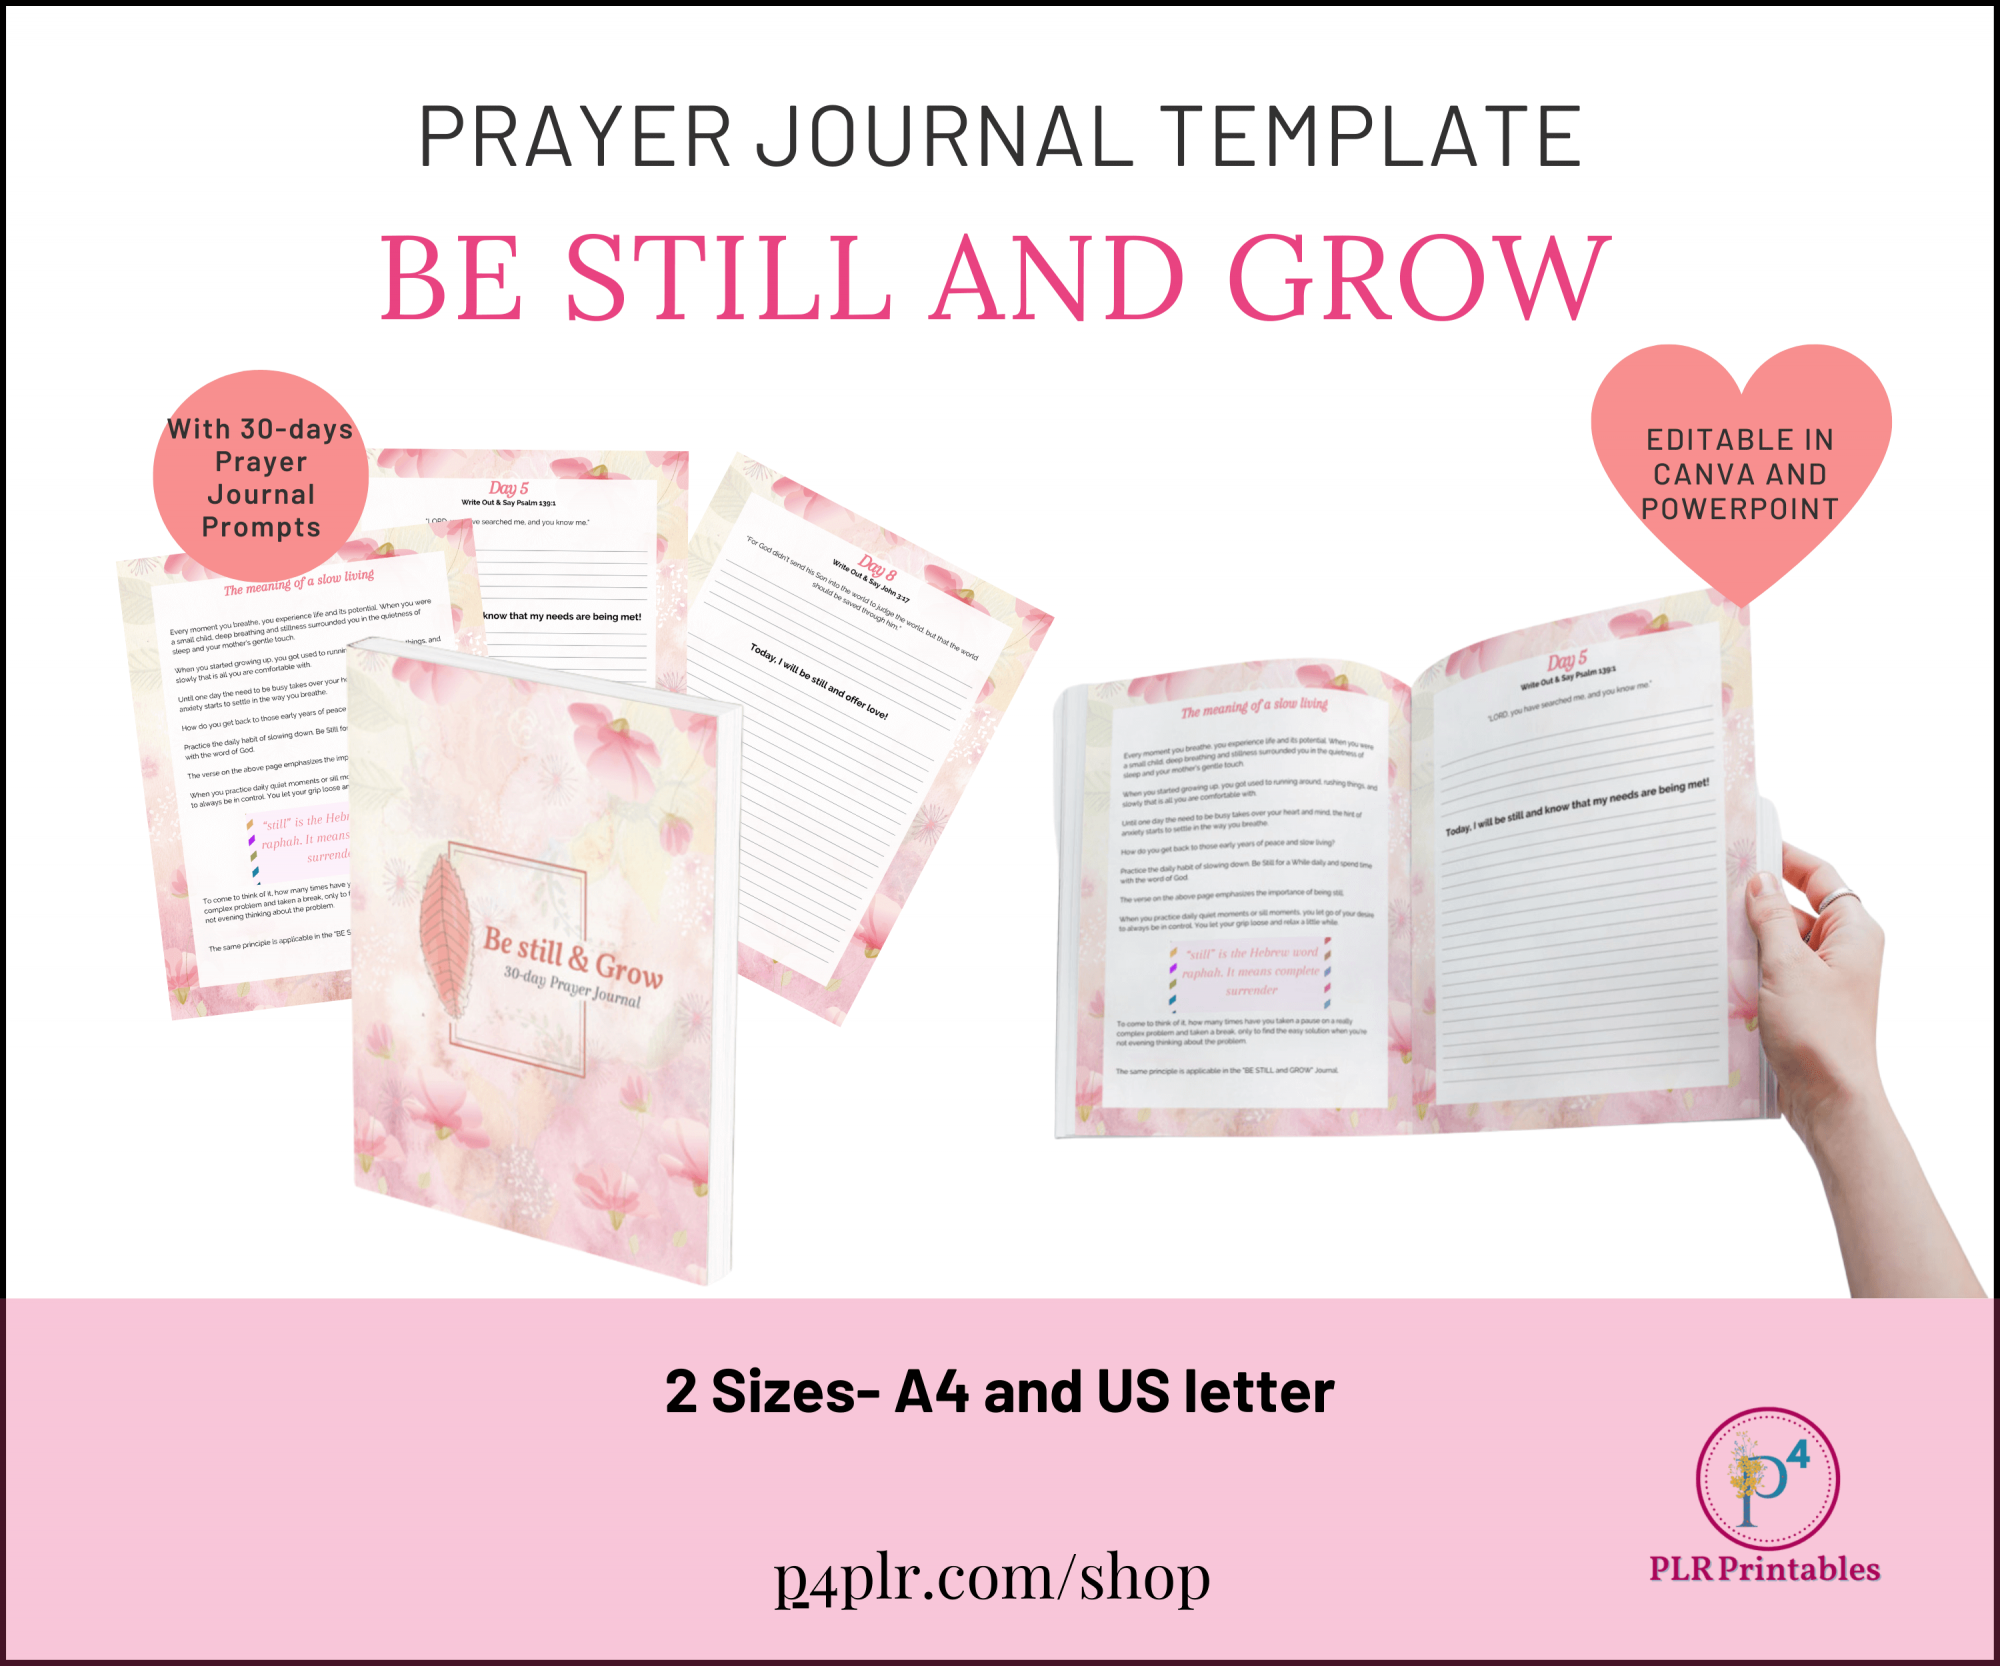 Be Still and Grow Daily Prayer Journal Template